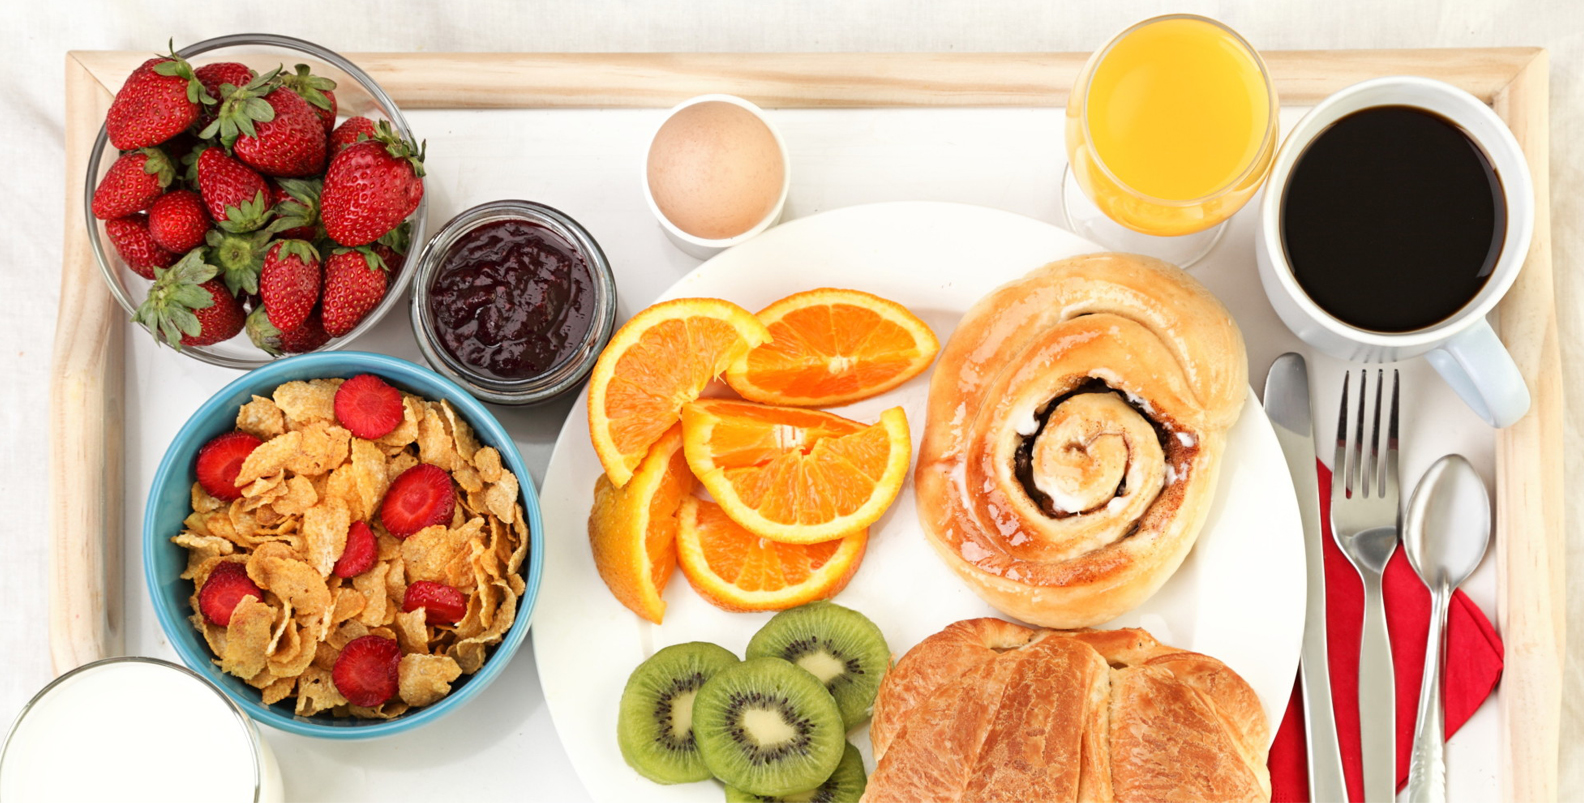 On-the-go Breakfast Products Market'